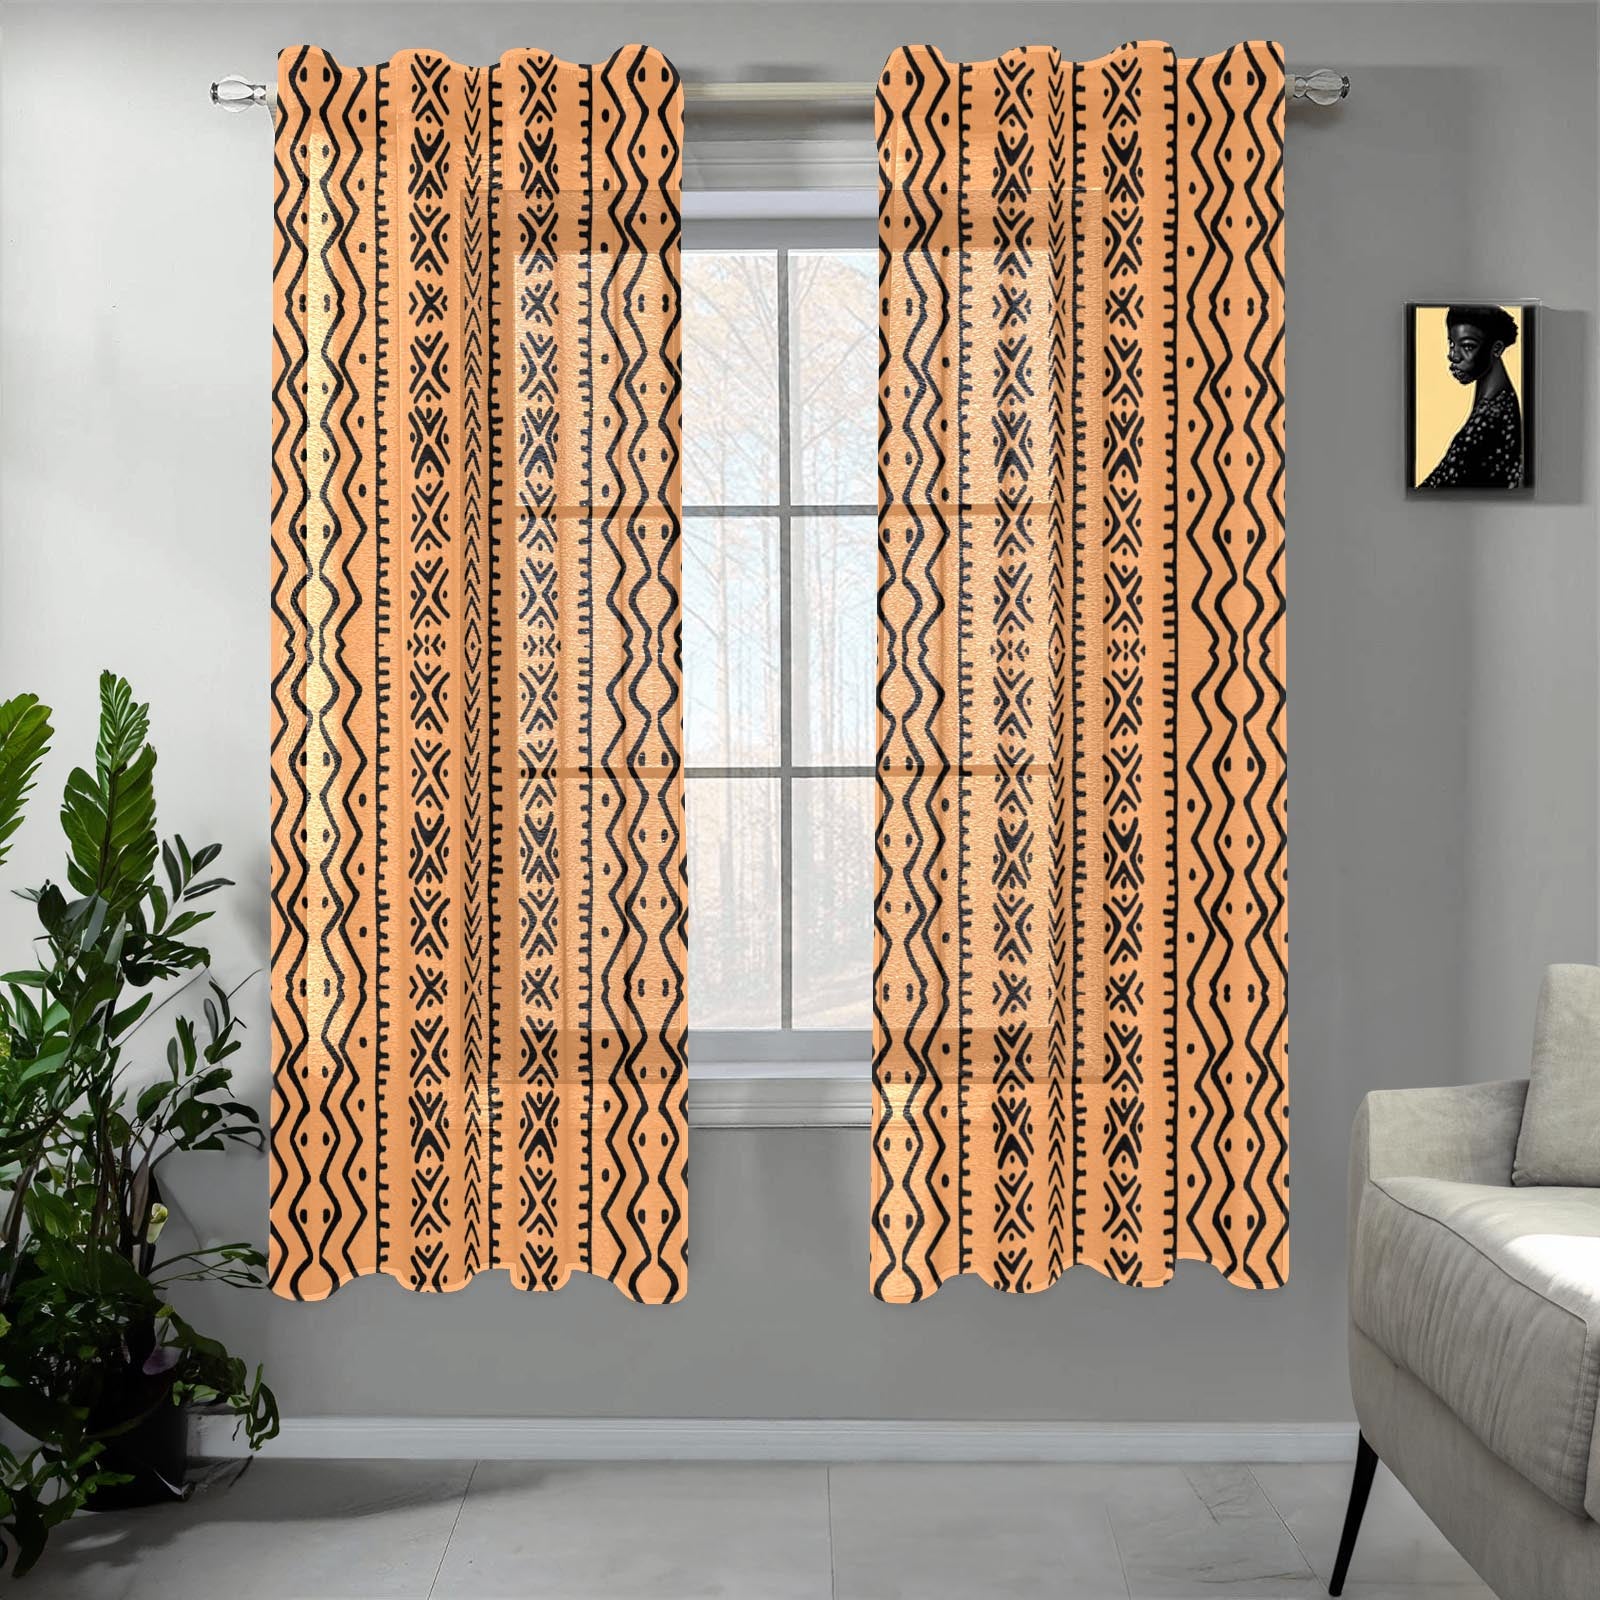 African Guaze Curtain Mudcloth Print (Two Piece) - Bynelo